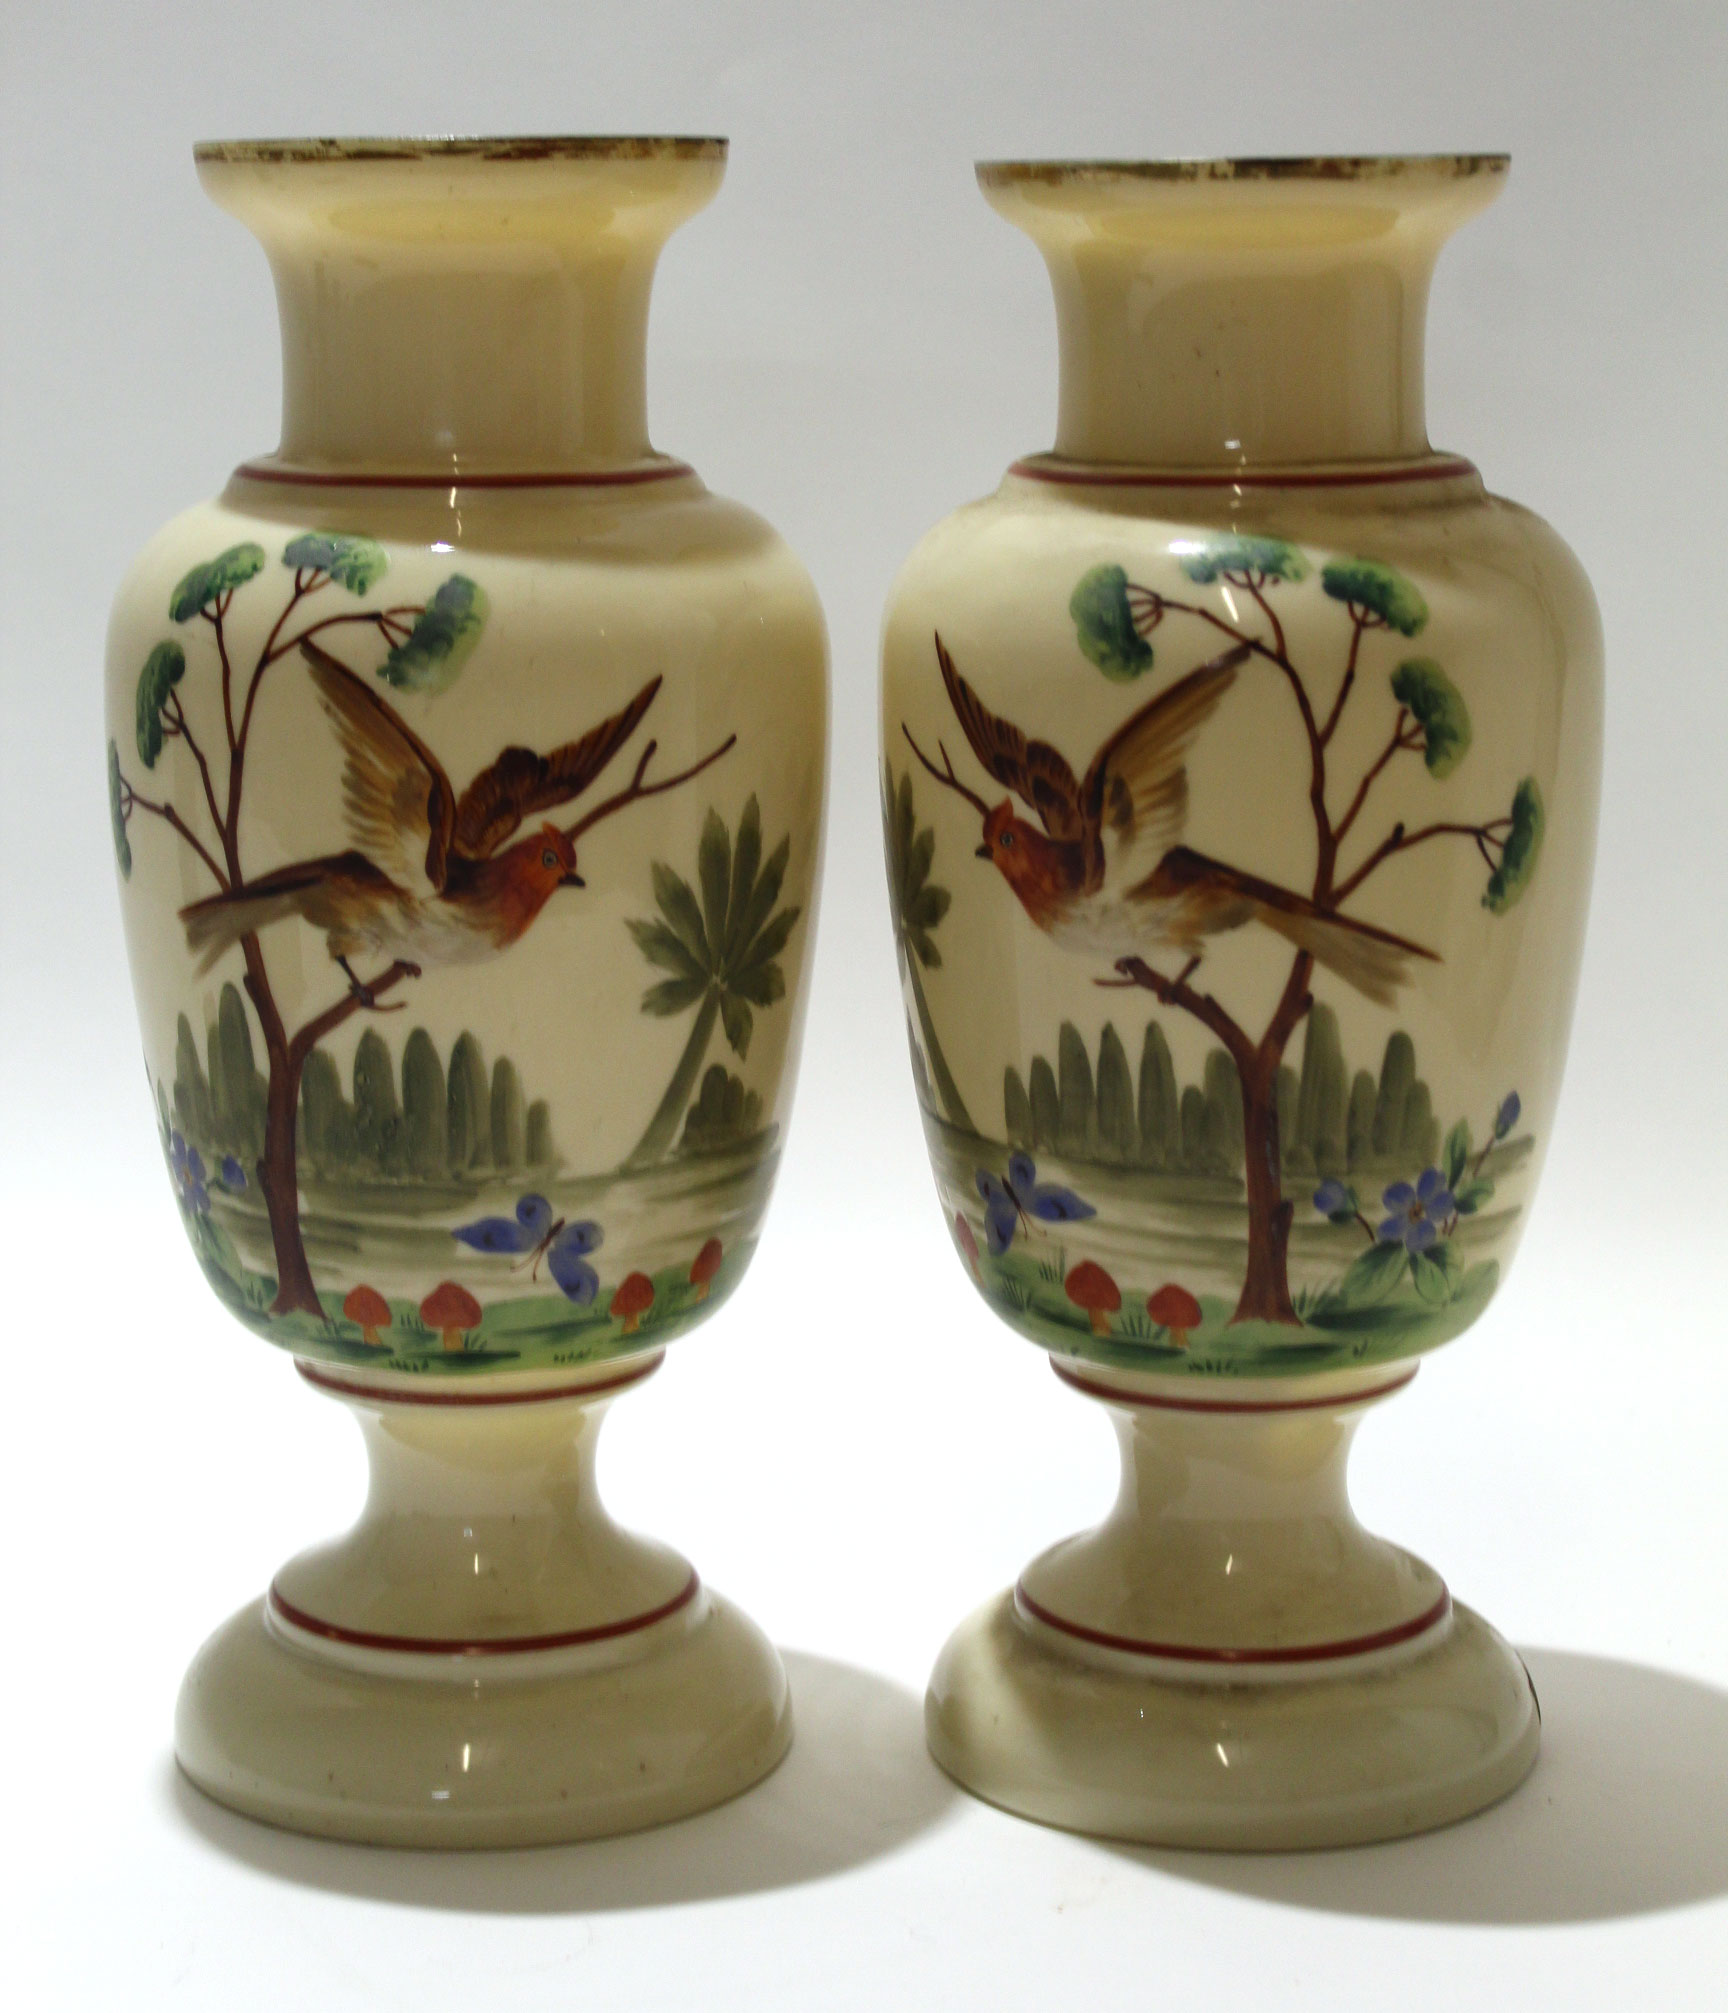 Pair of glass vases of baluster form, the beige bodies painted in polychrome with birds in branches,